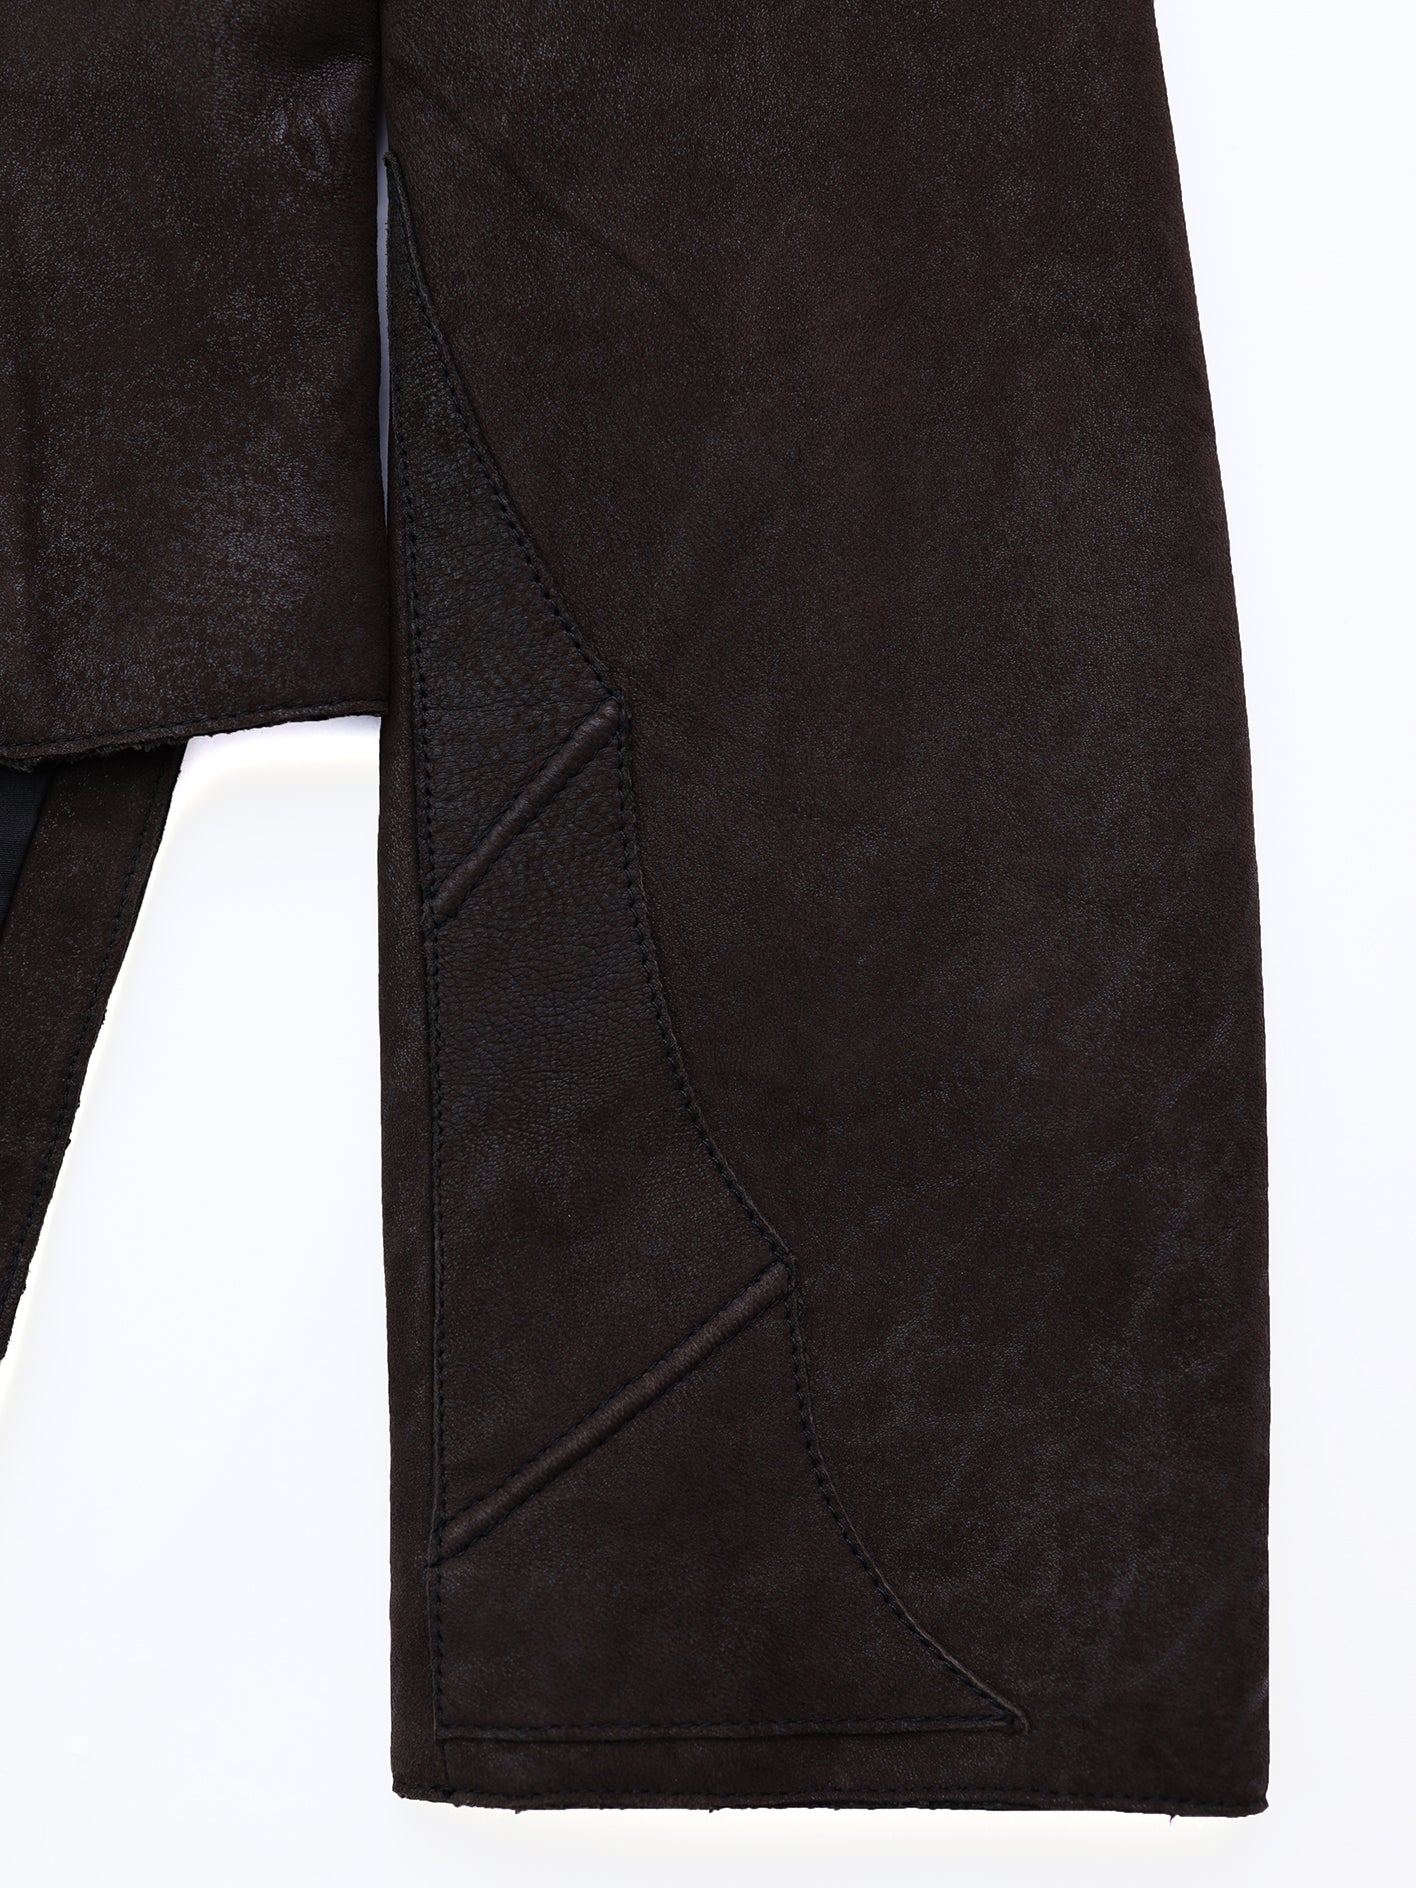 Brown Suede Leather Tail Jacket